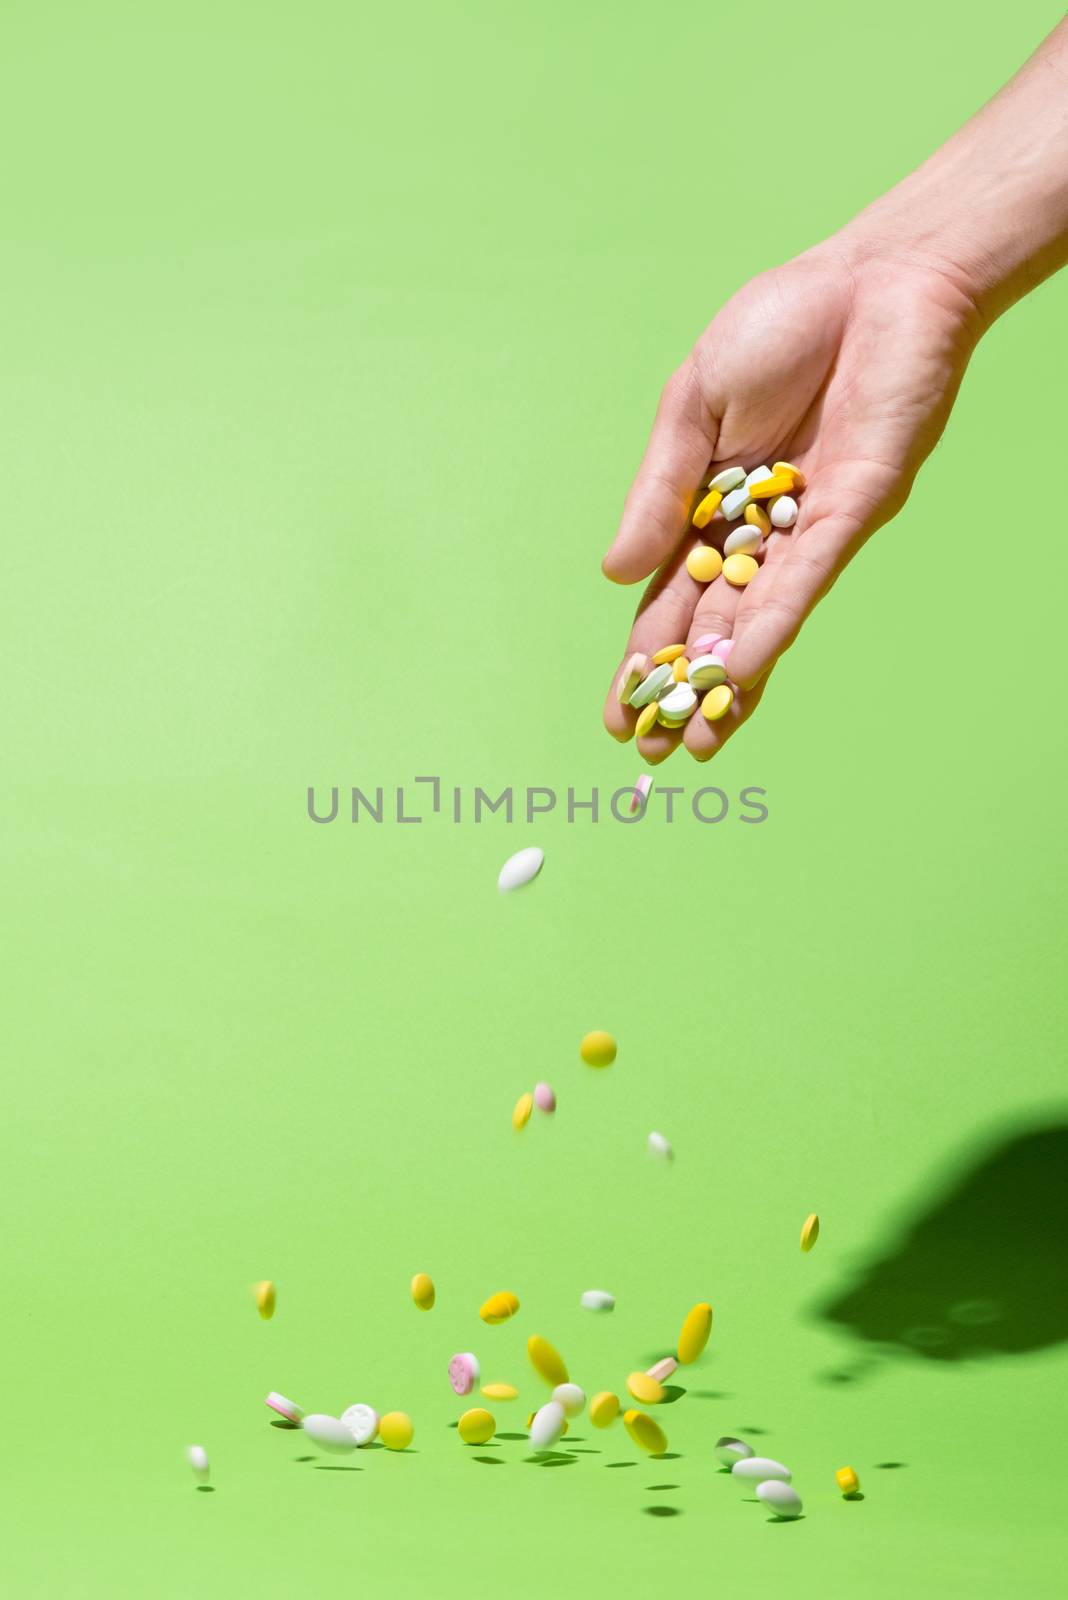 Colored pills falling from hand on green background. by makidotvn